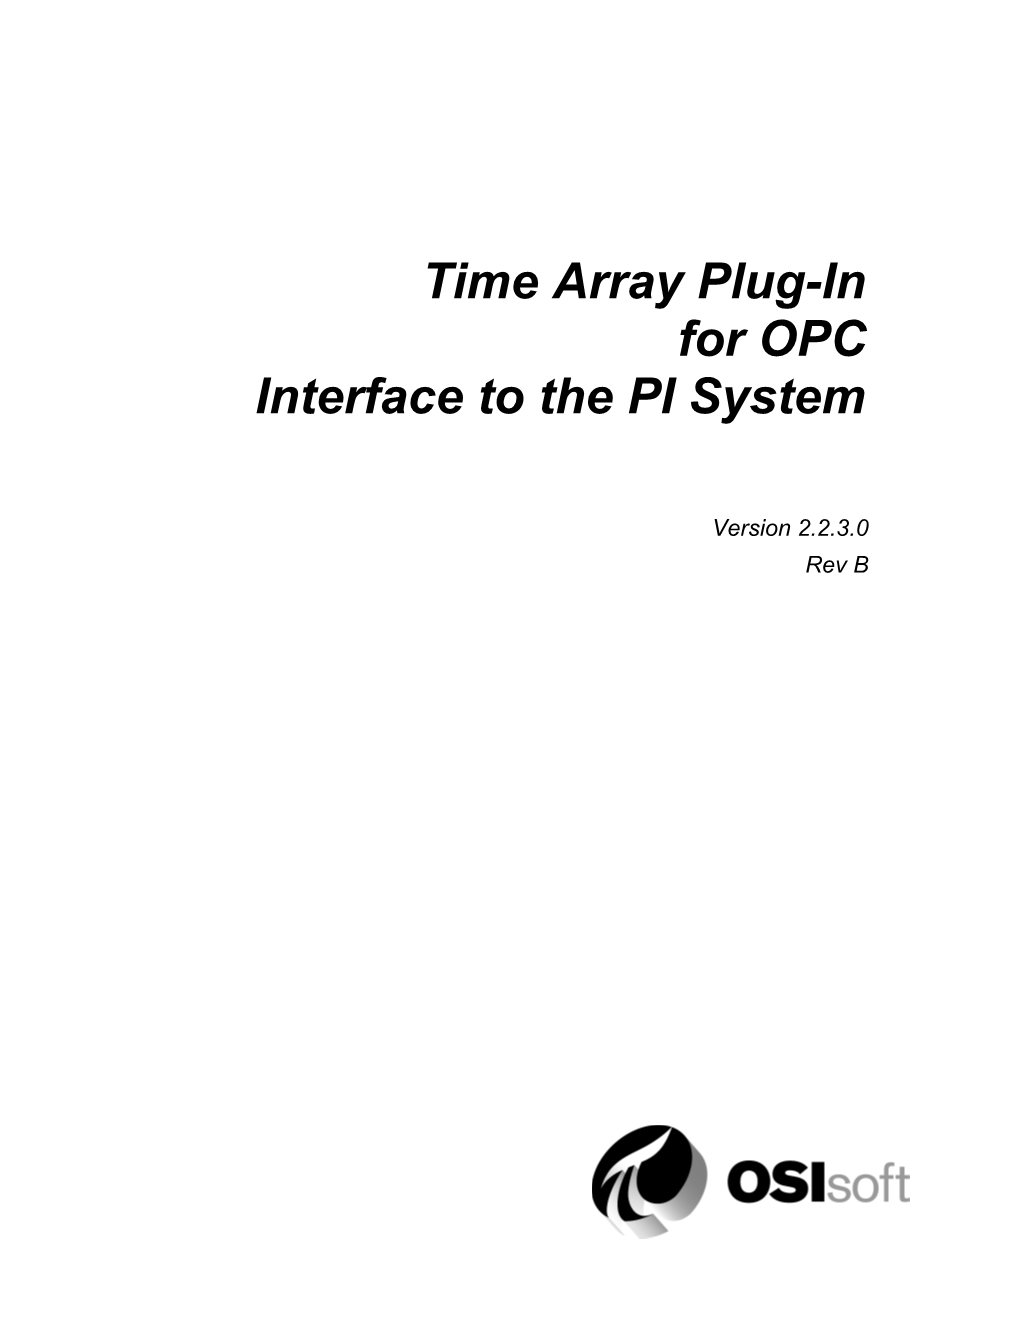 Time Array Plug-In for OPC Interface to the PI System